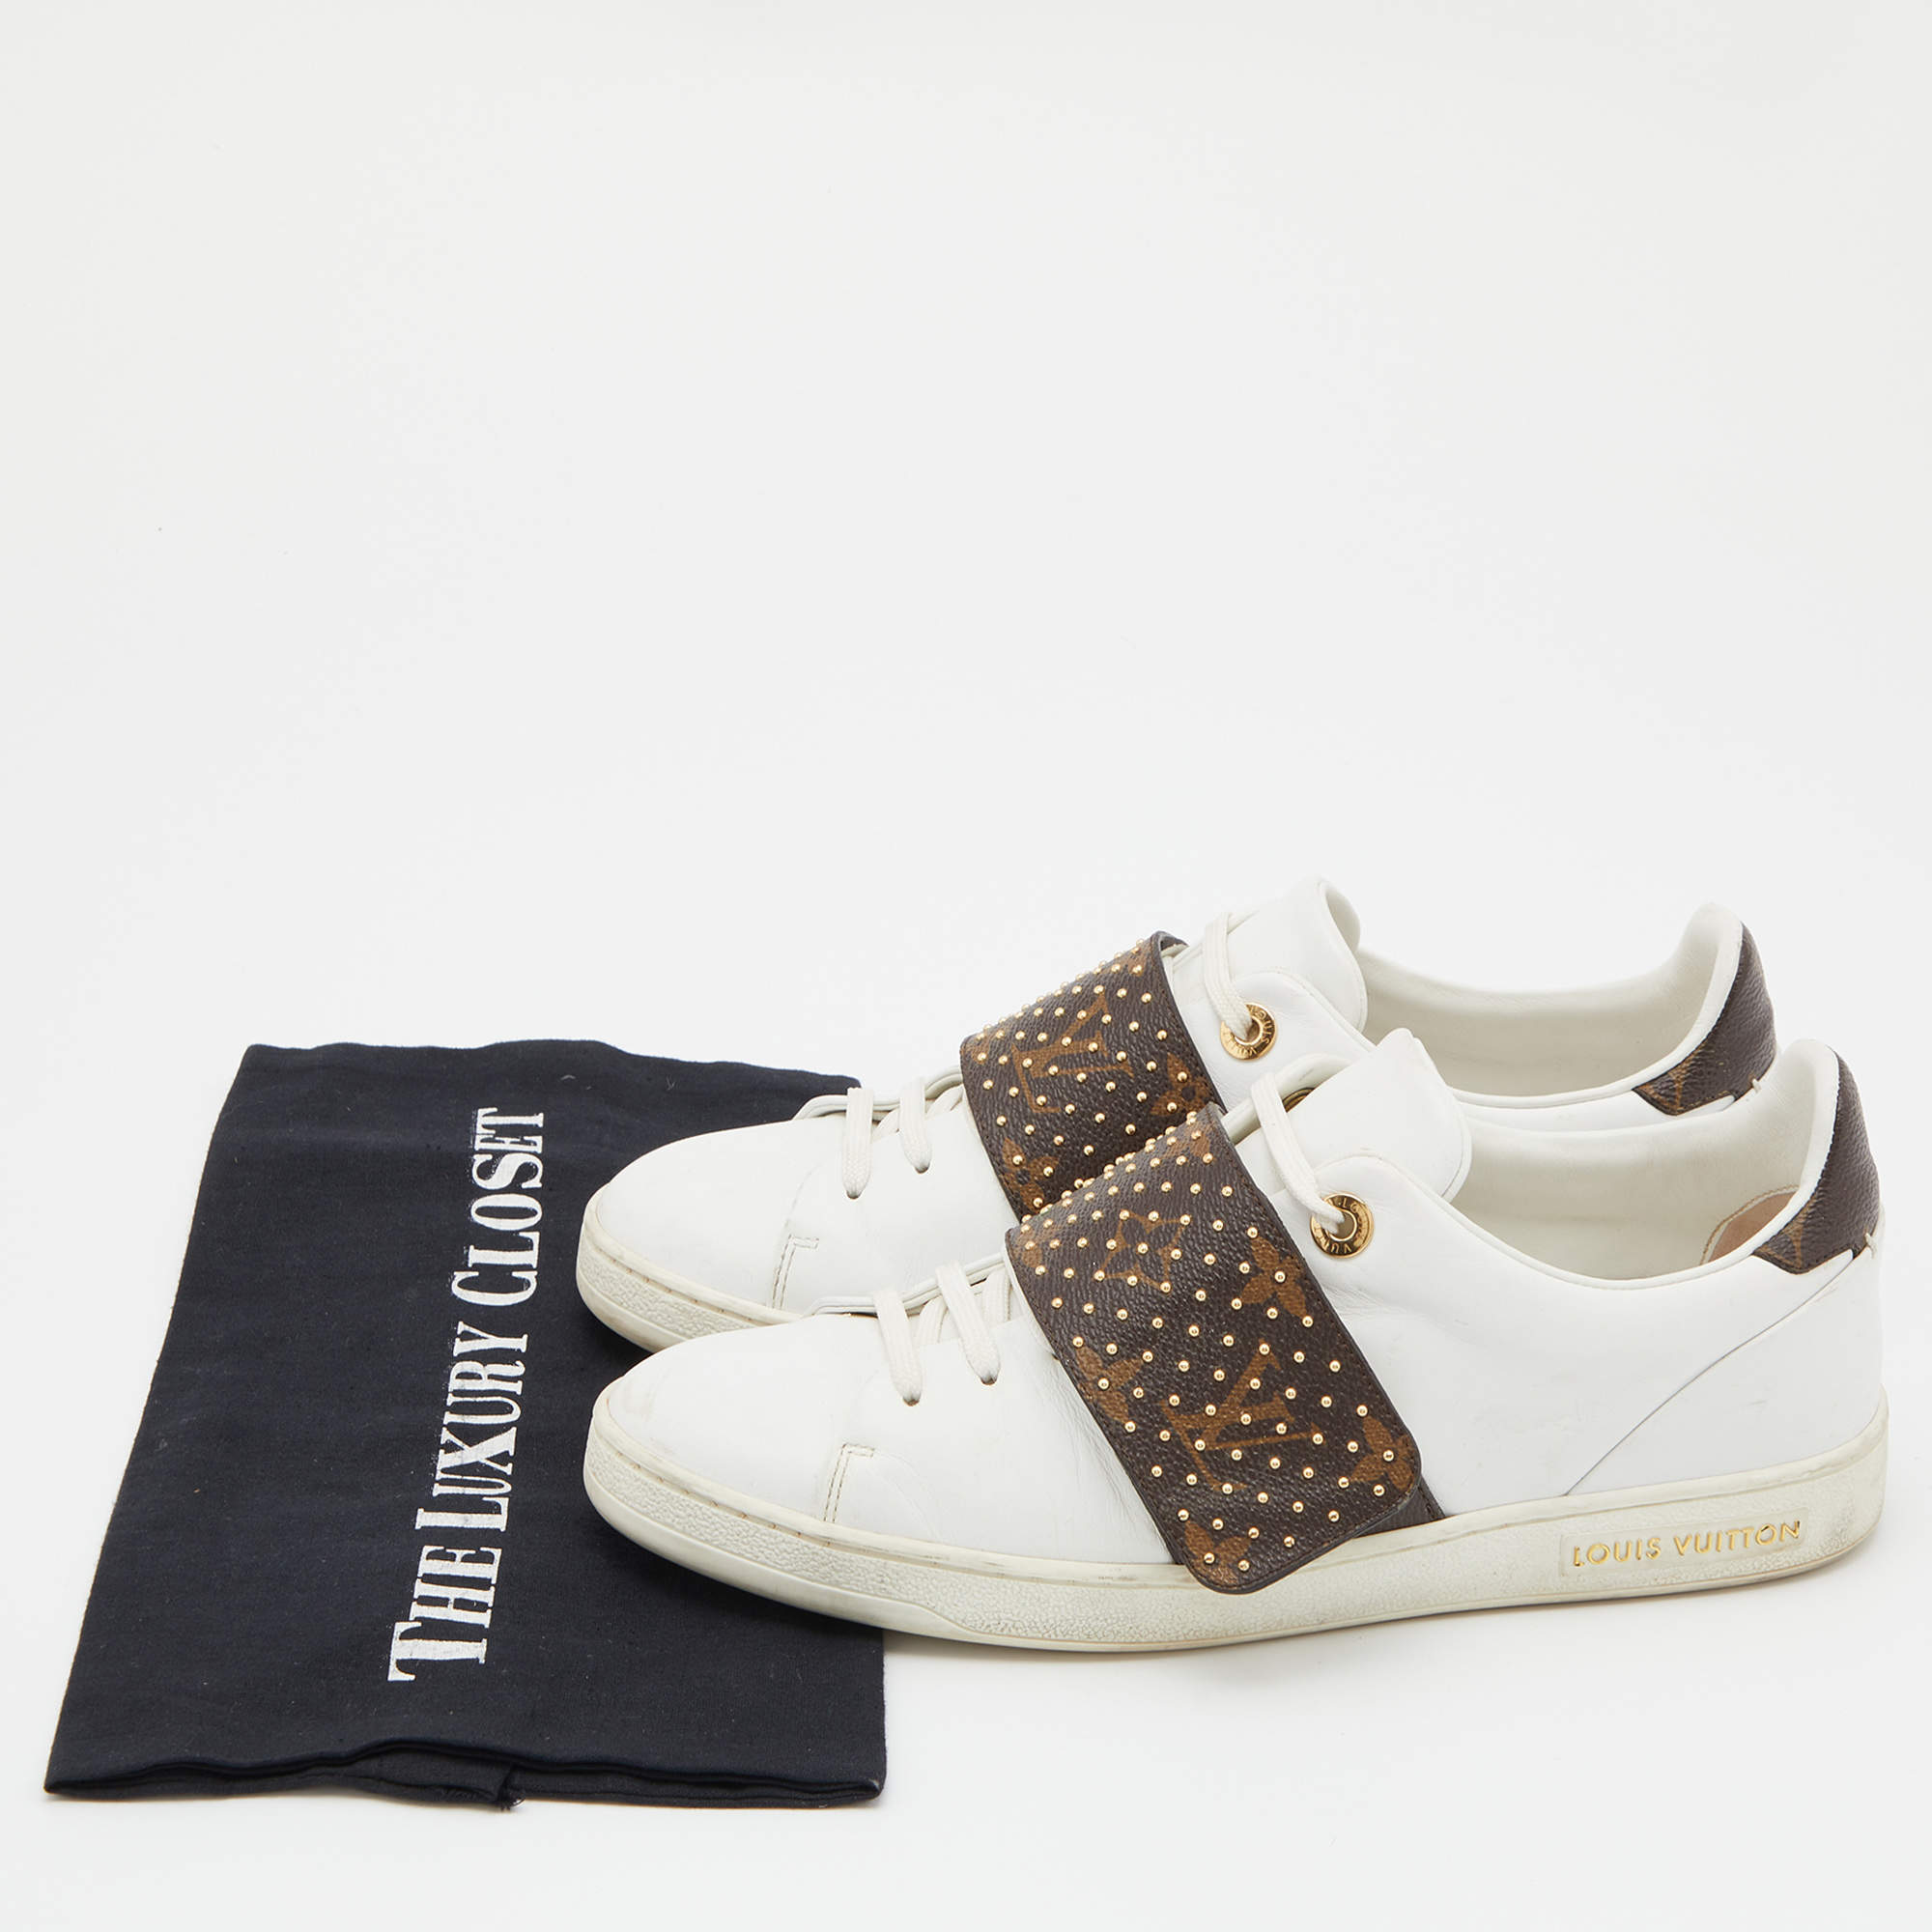 Louis Vuitton Frontrow Sneakers - Brown Sneakers, Shoes - LOU736433